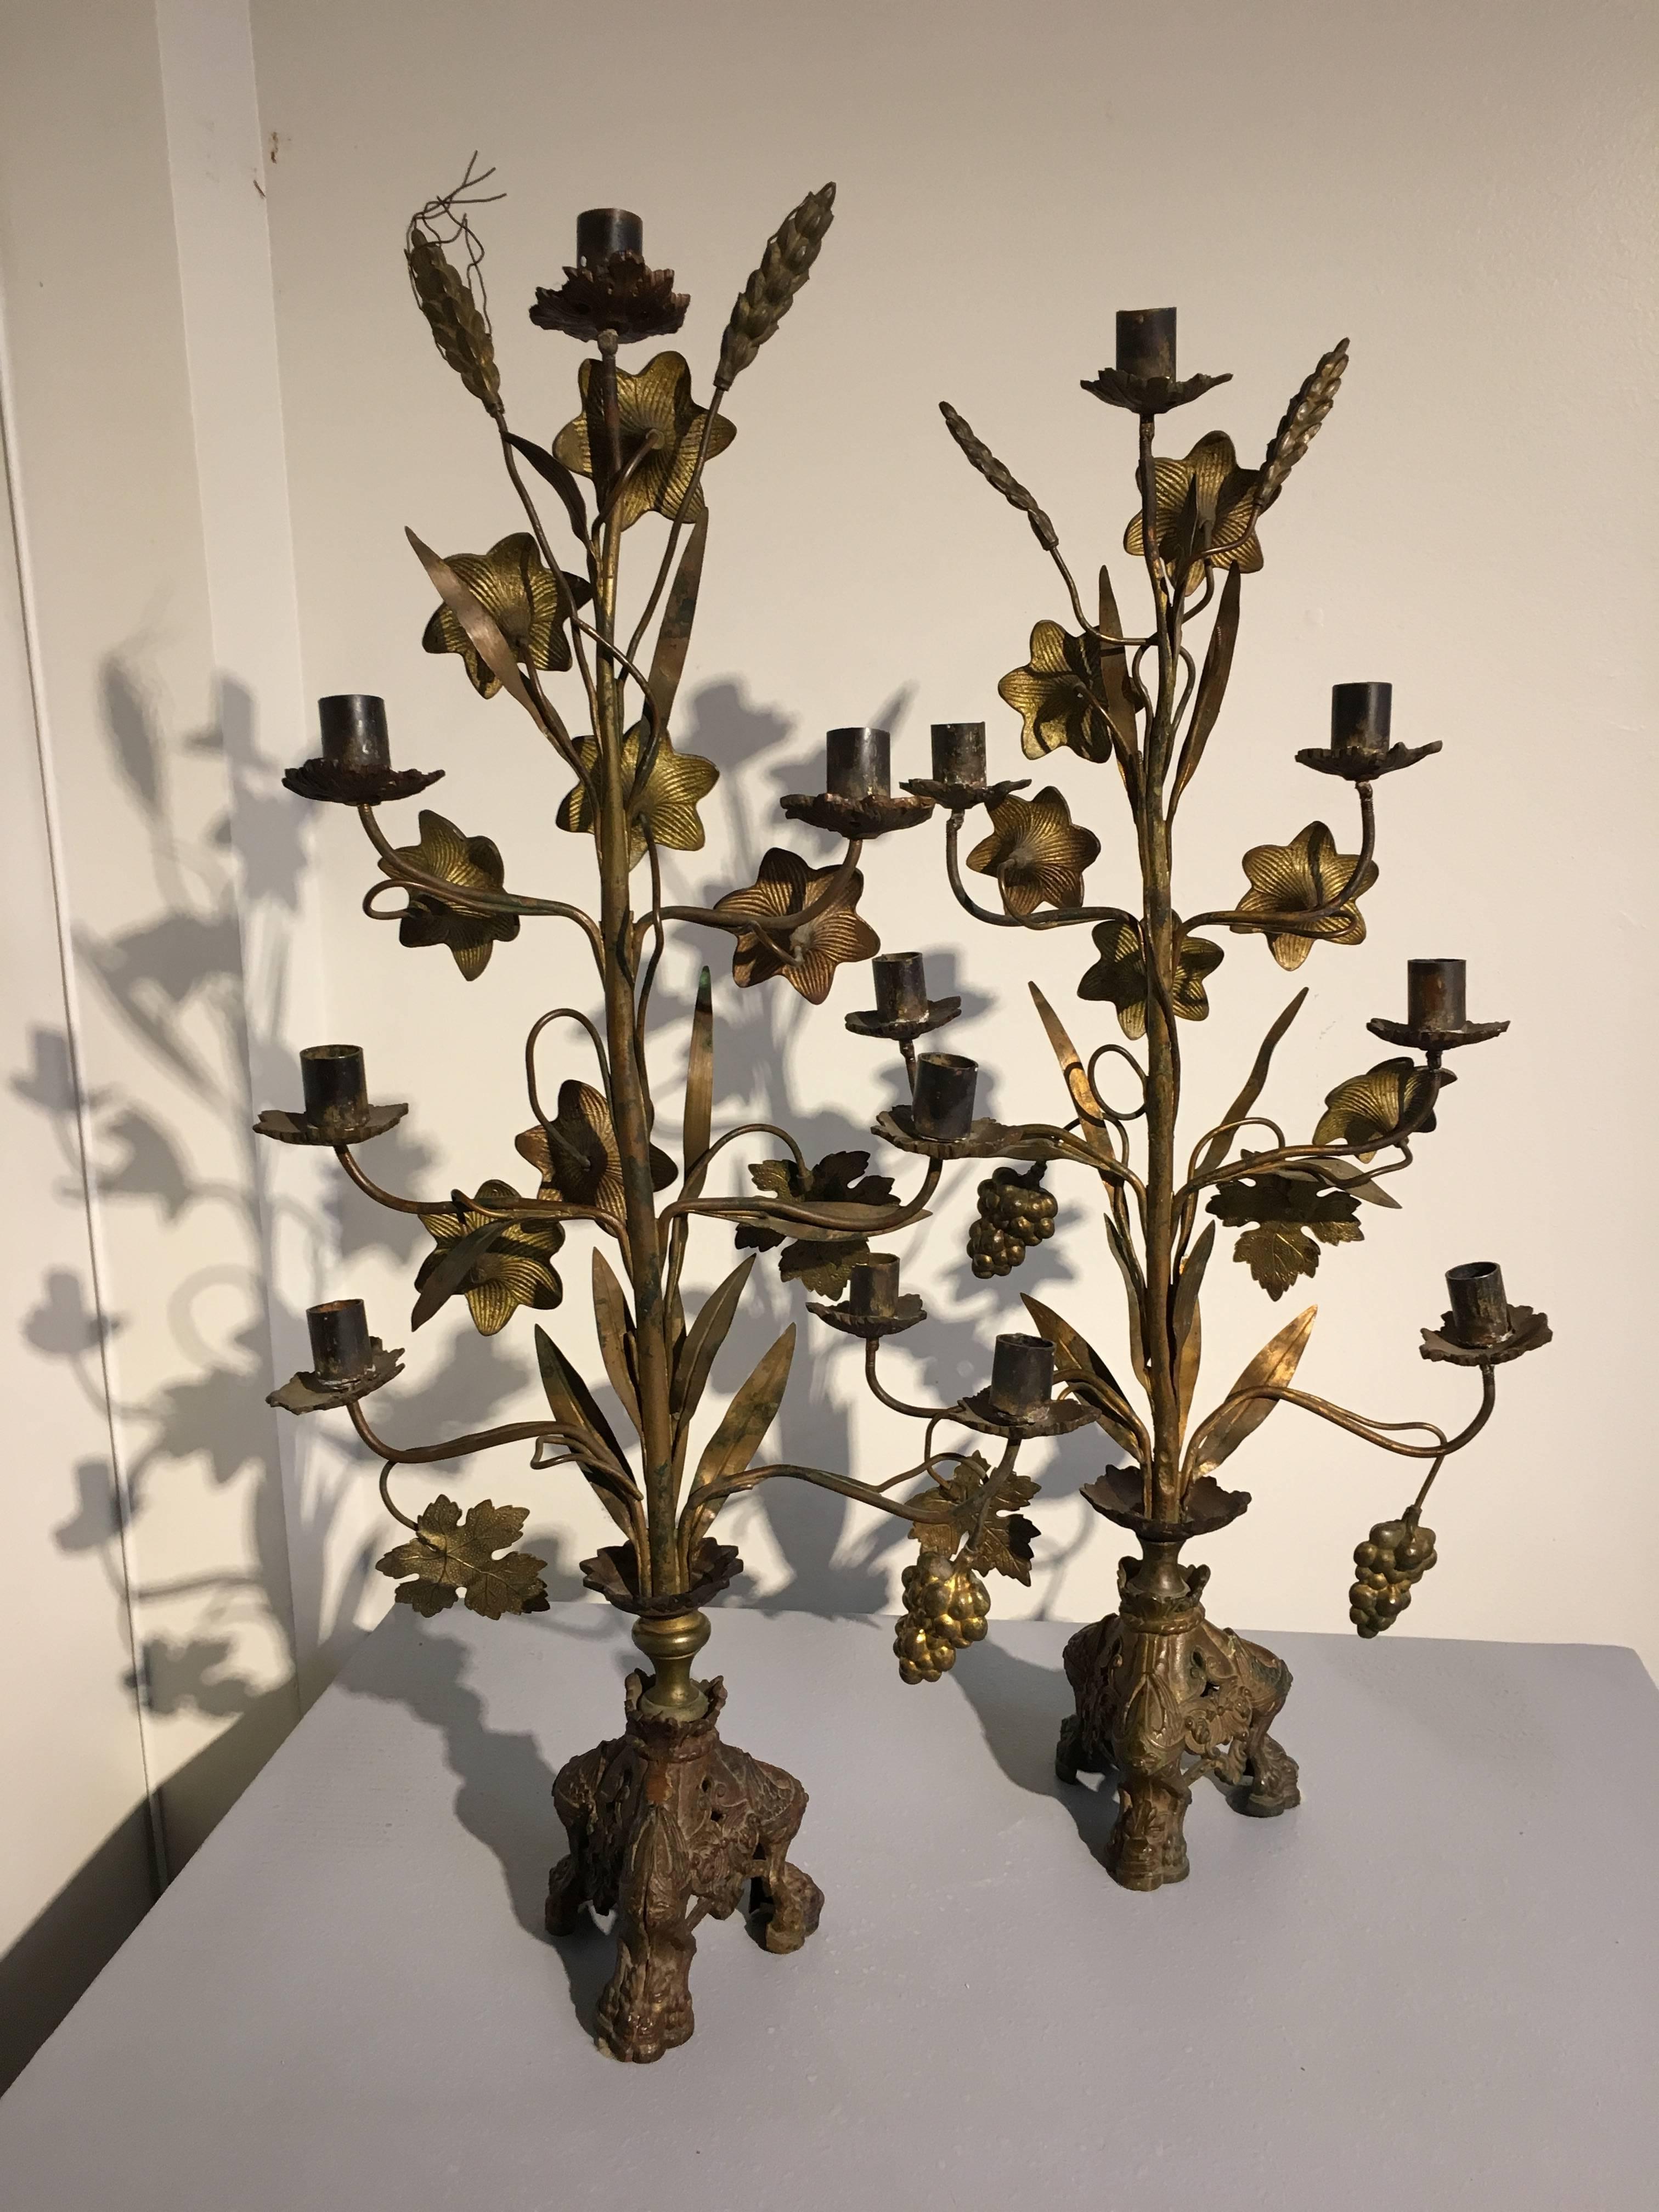 A beautiful pair of French Provincial candelabra, featuring a harvest motif, with sheafs of wheat, clusters of grapes, and lily blossoms. Each with six arms and seven sconces. The candelabra set up upon three winged lion feet.